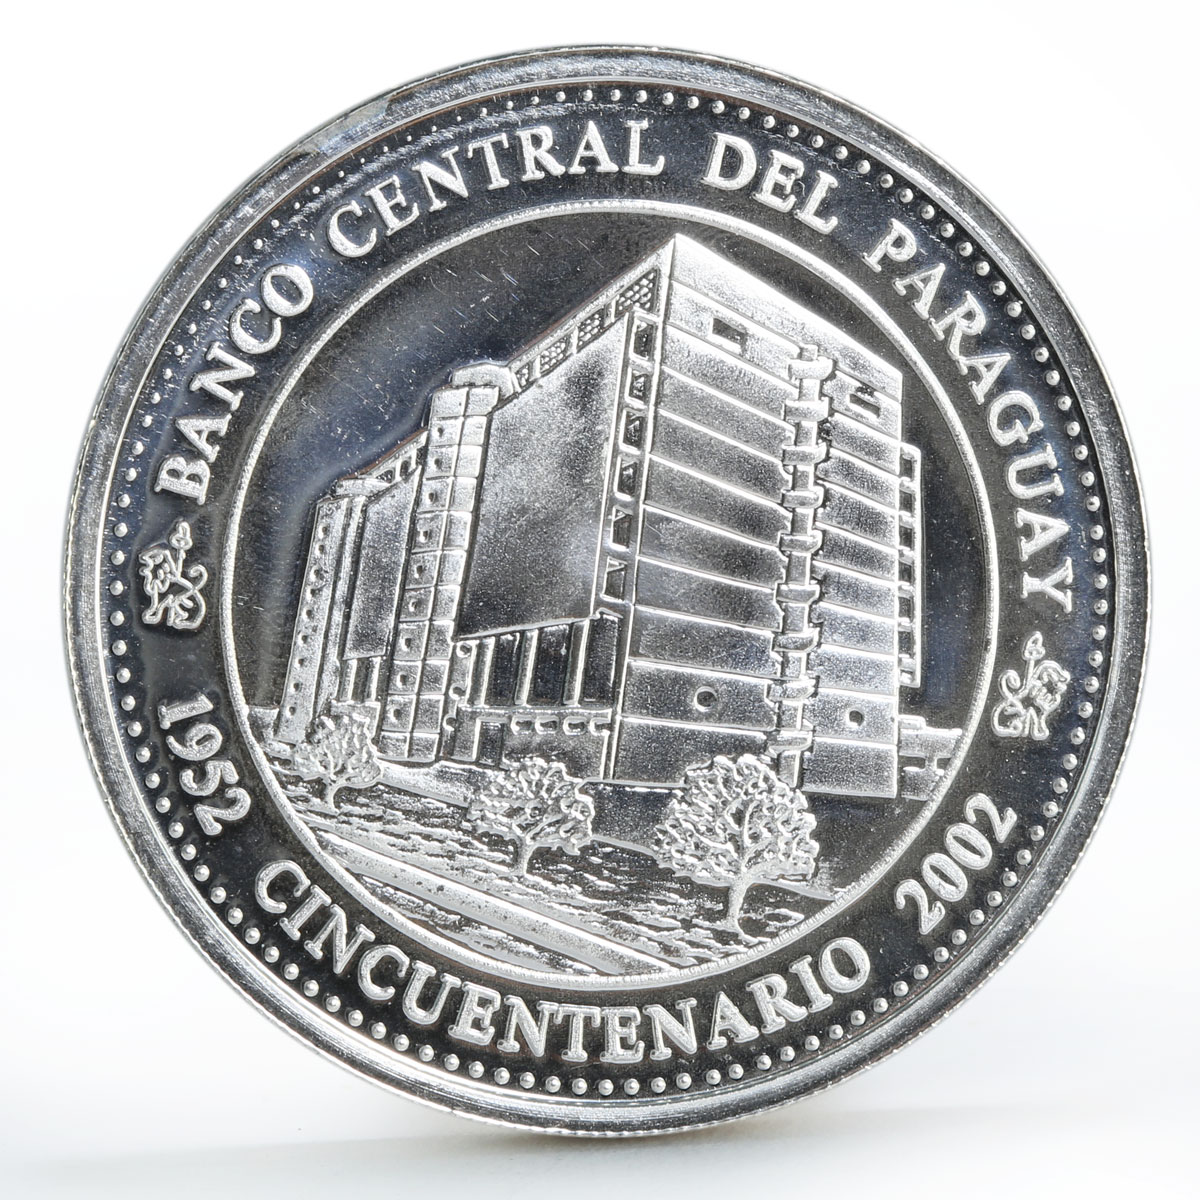 Paraguay 1 guarani 50 Years of Central Bank Building Ship silver coin 2002